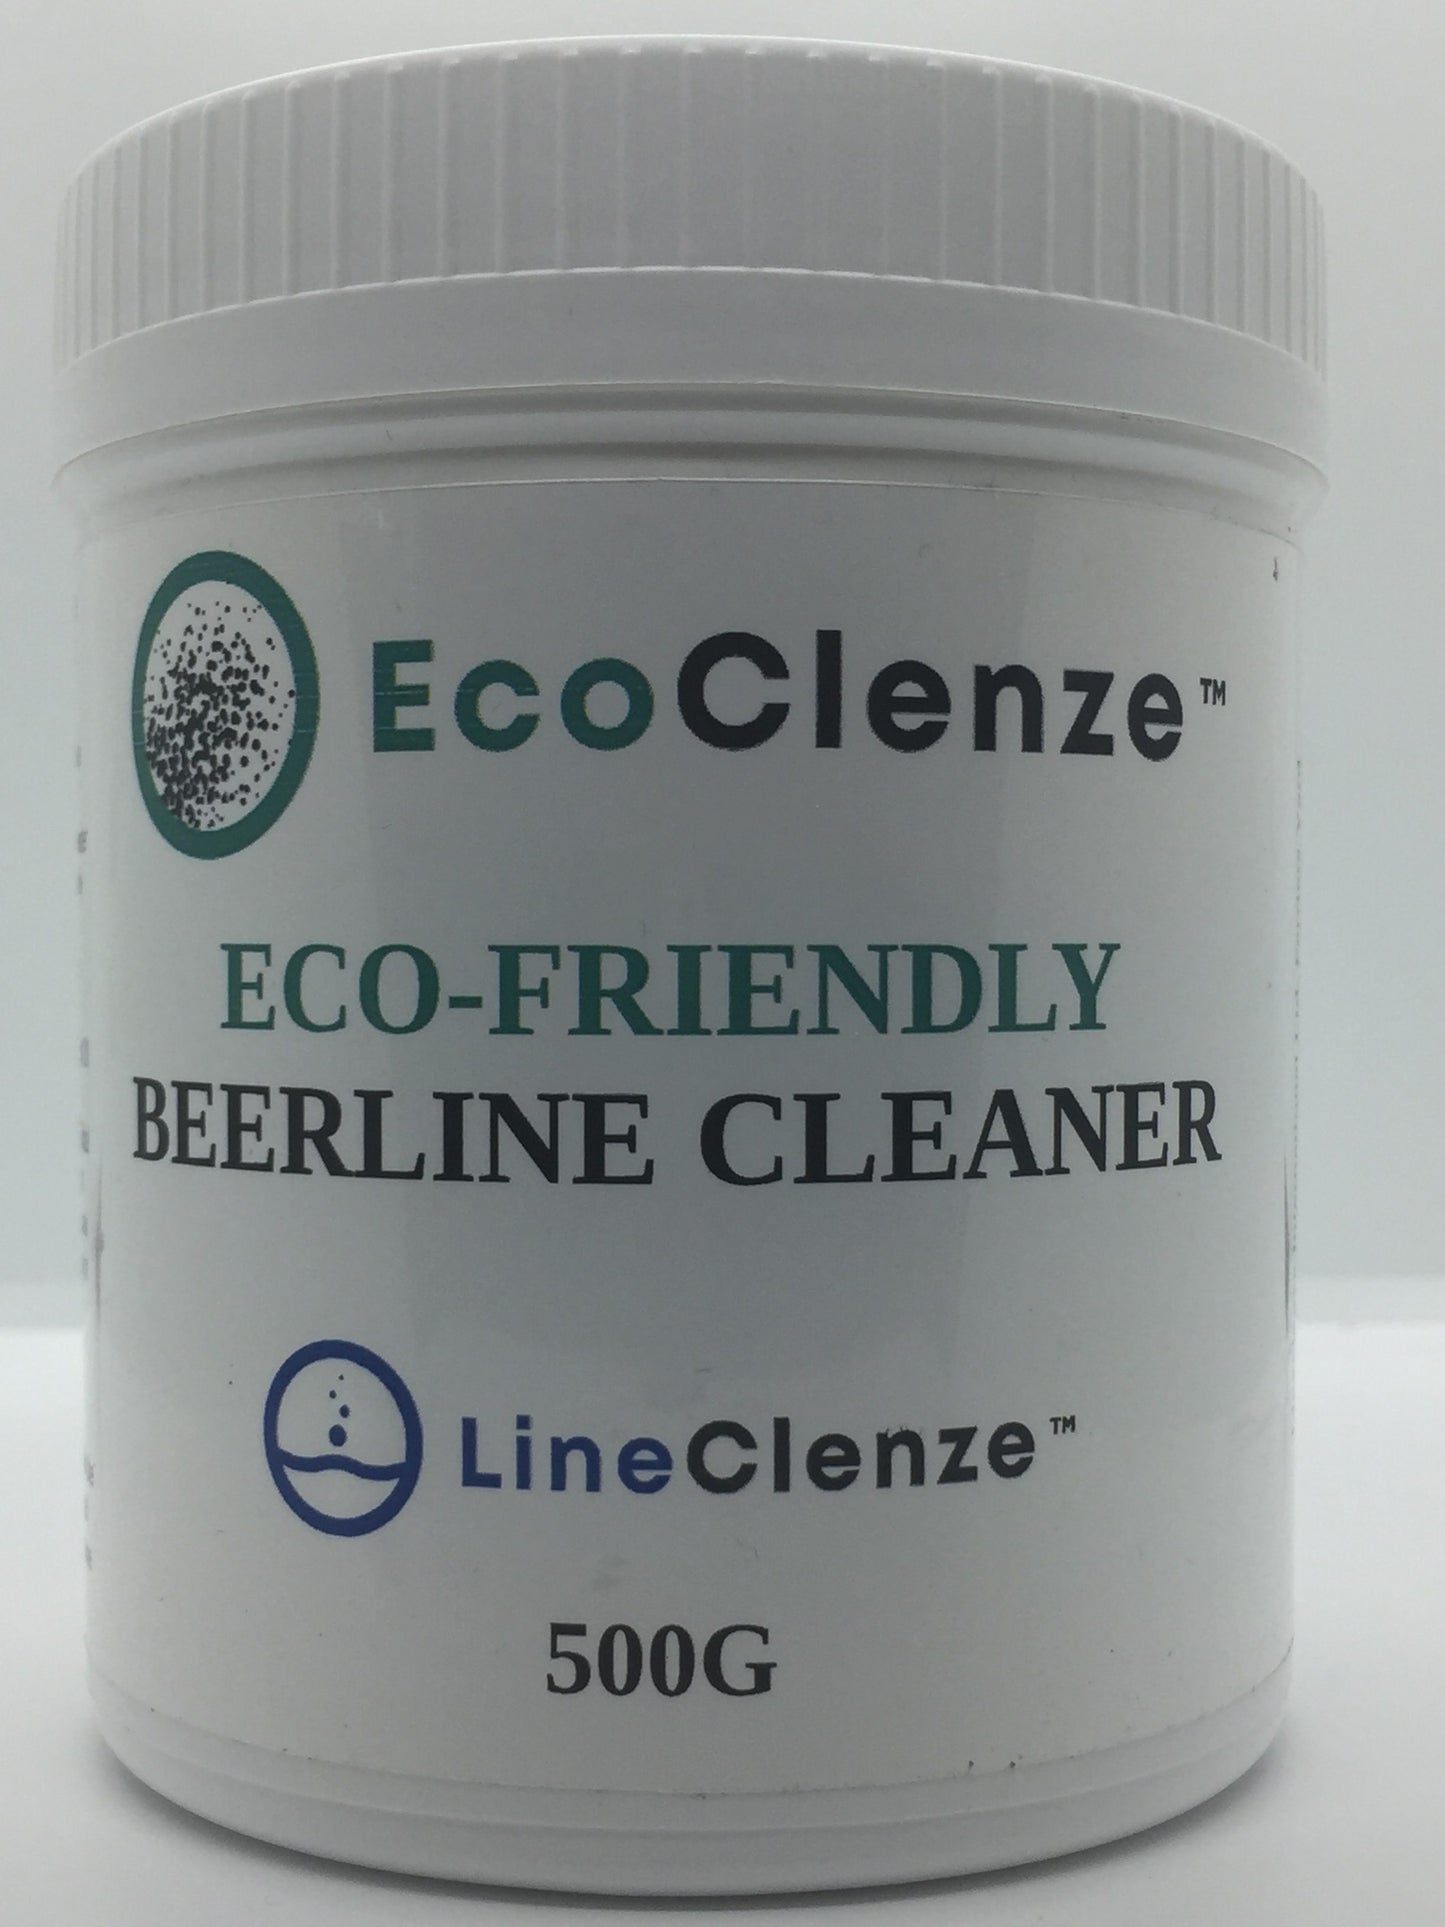 EcoClenze | LineClenze | Beer/Wine Equipment Cleaning Powder